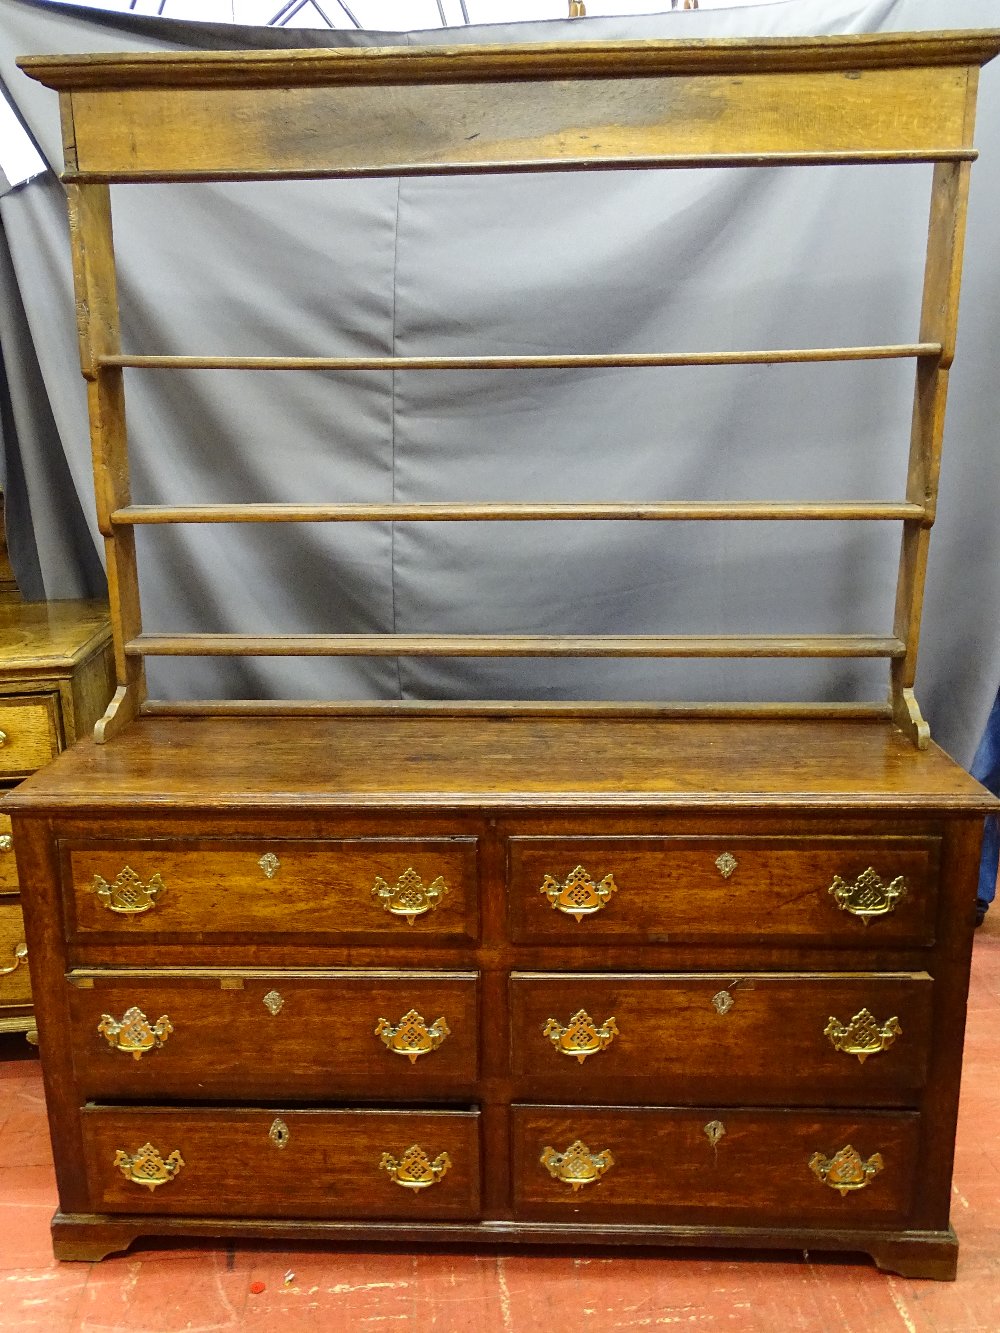 AN ANTIQUE CONVERTED MULE CHEST/DRESSER, the base having six opening drawers with pierced brass